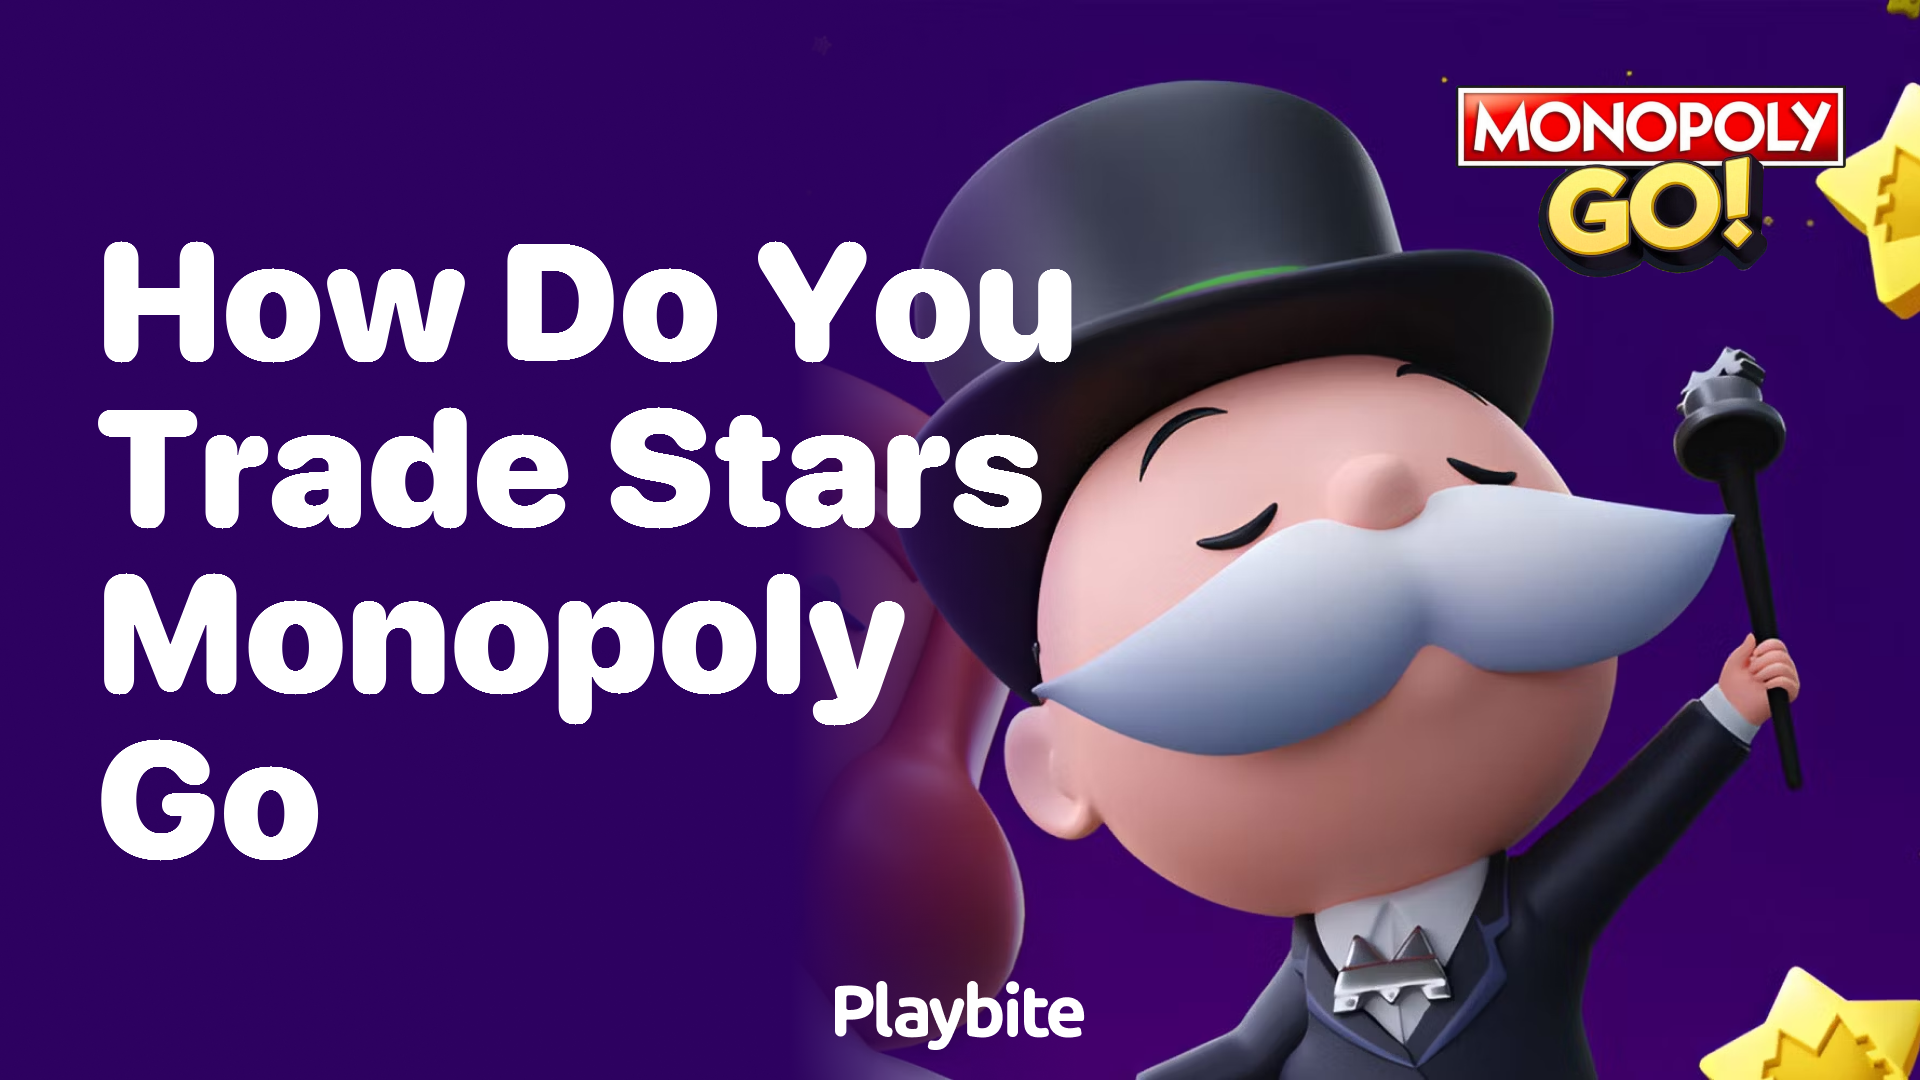 How Do You Trade Stars in Monopoly Go?